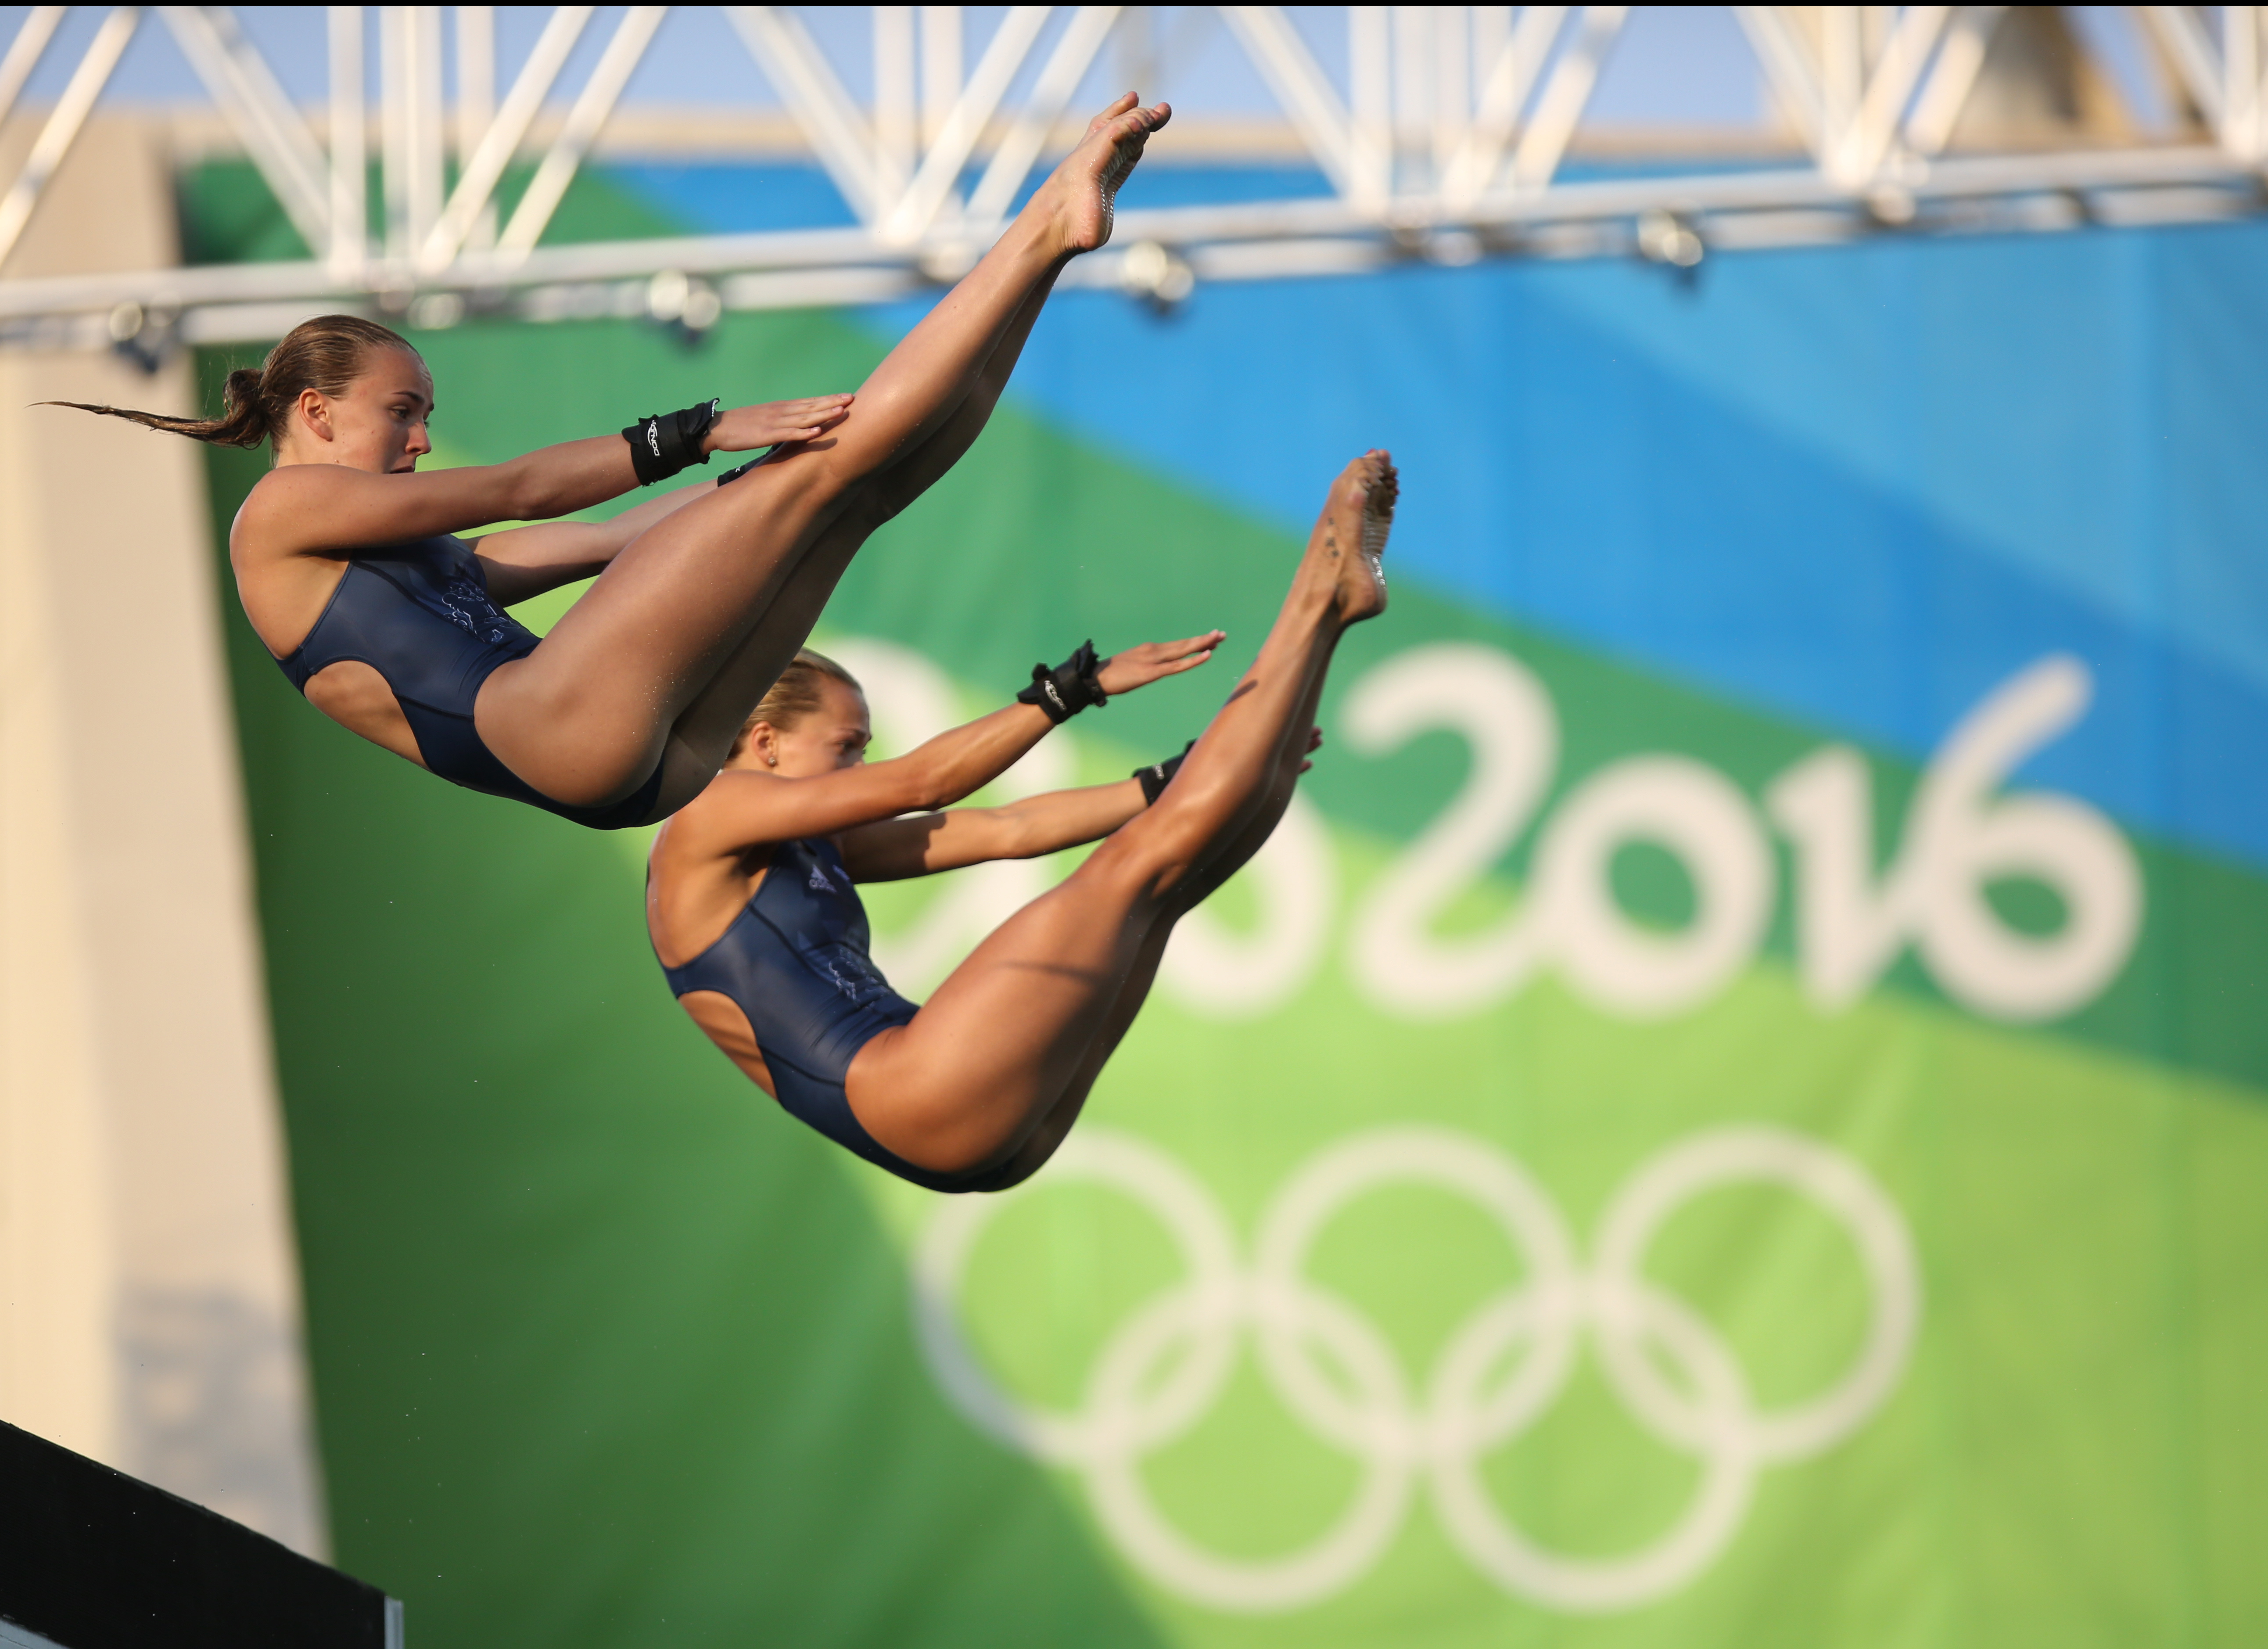 Tonia Couch competed in the Women’s Synchronised 10m Platform Final with Lois Toulson at Rio 2016